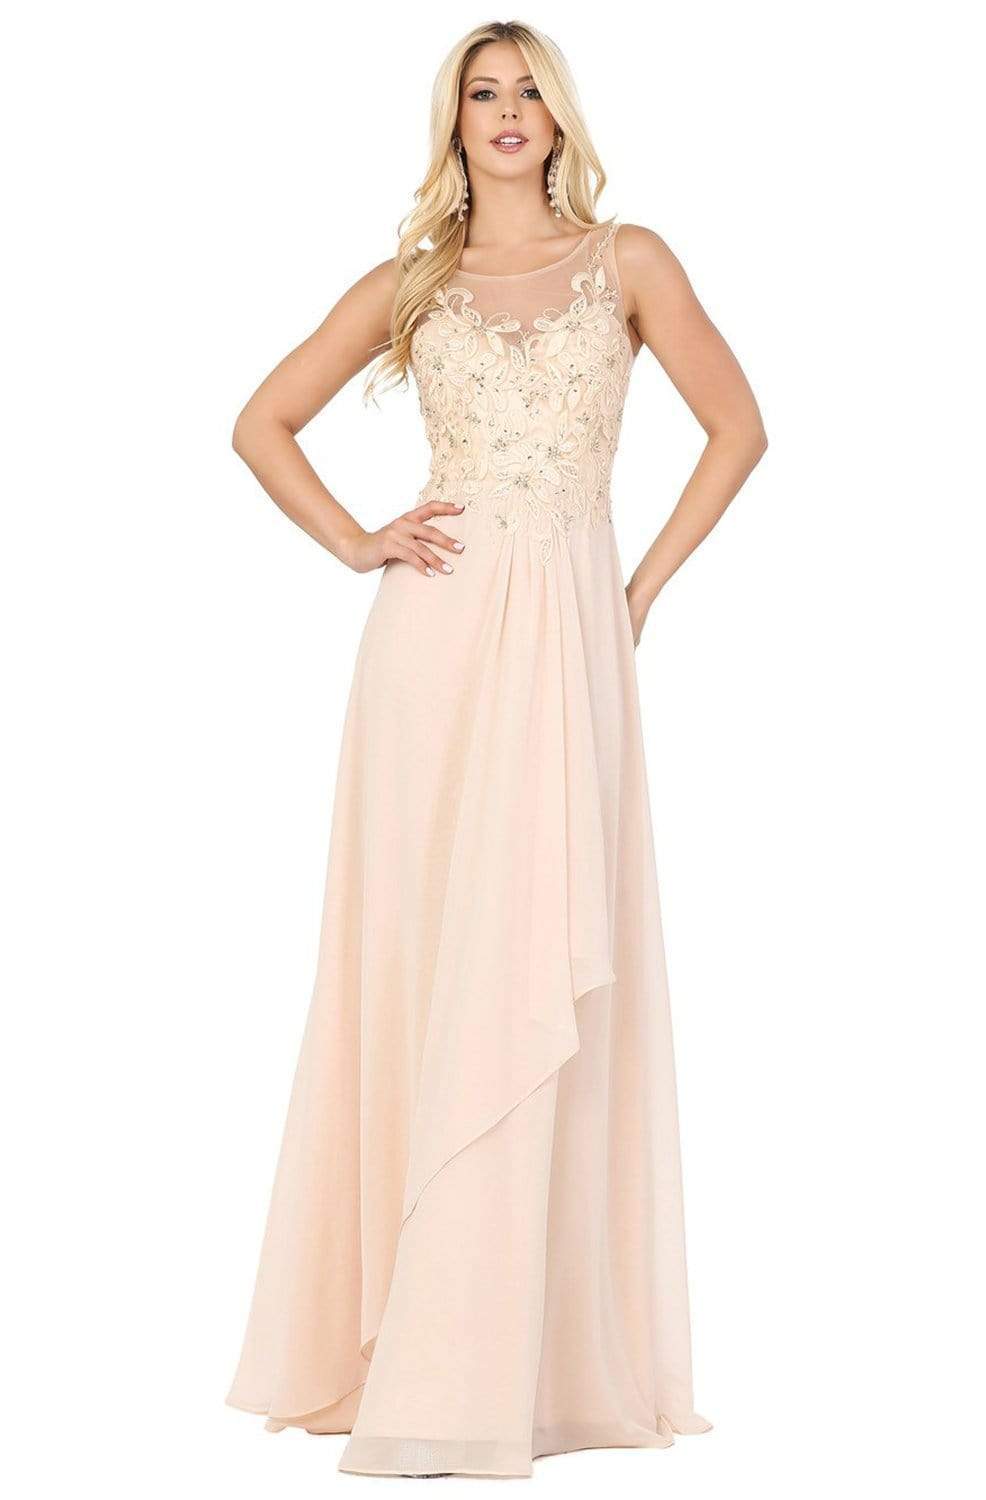 Dancing Queen - 2953 Embellished Bateau Neck A-line Dress Prom Dresses XS / Champagne